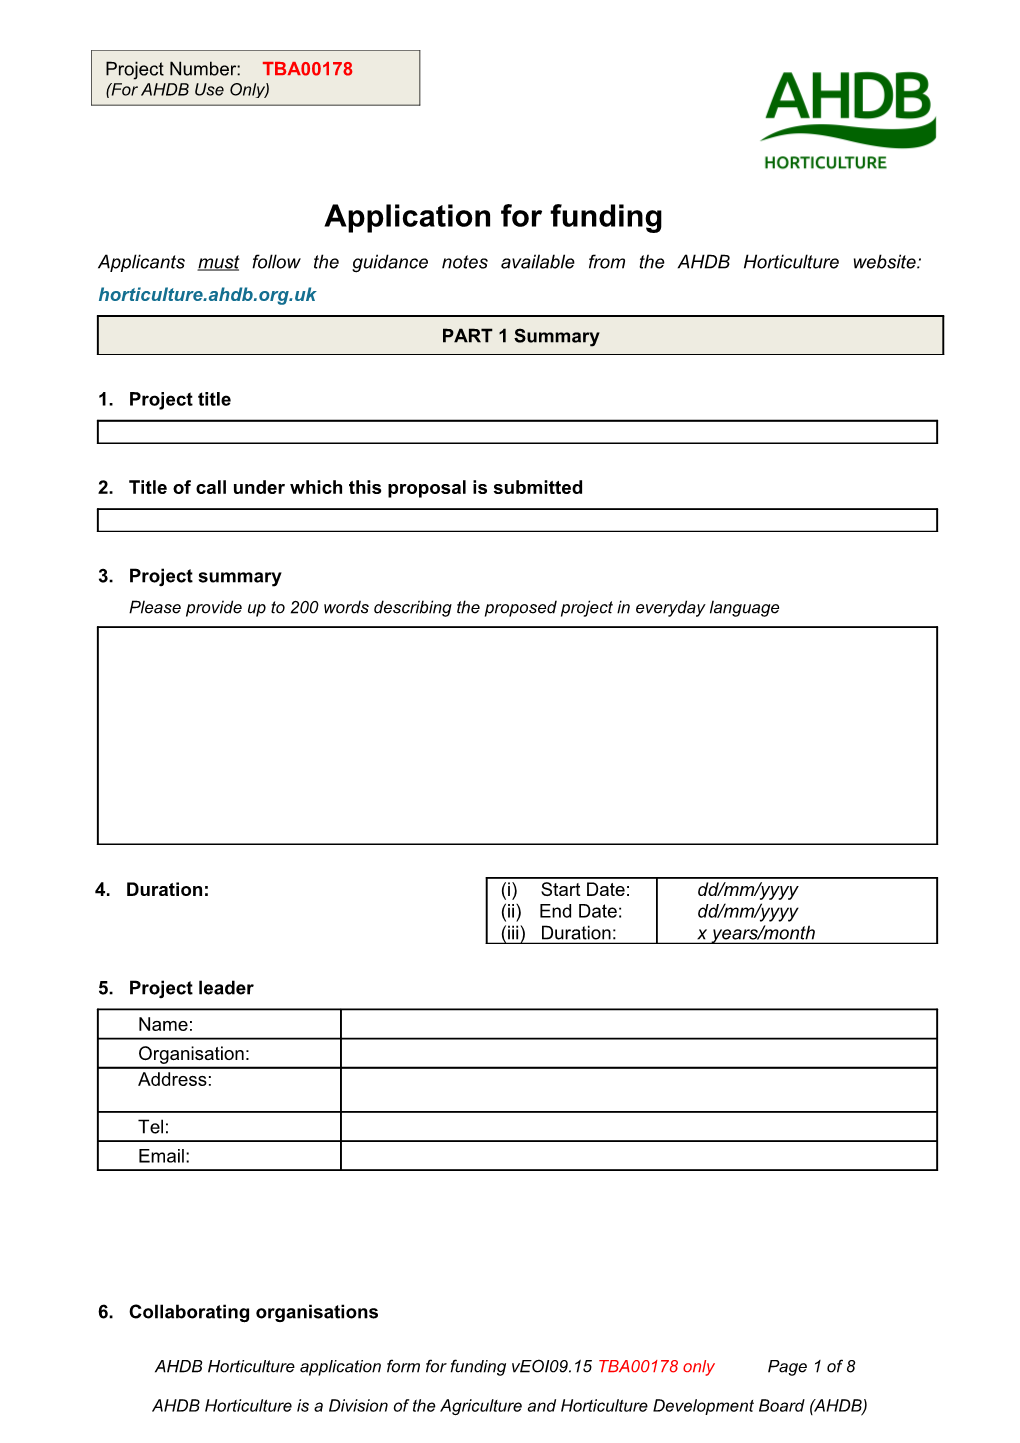 Application Form for Research Funding from HDC